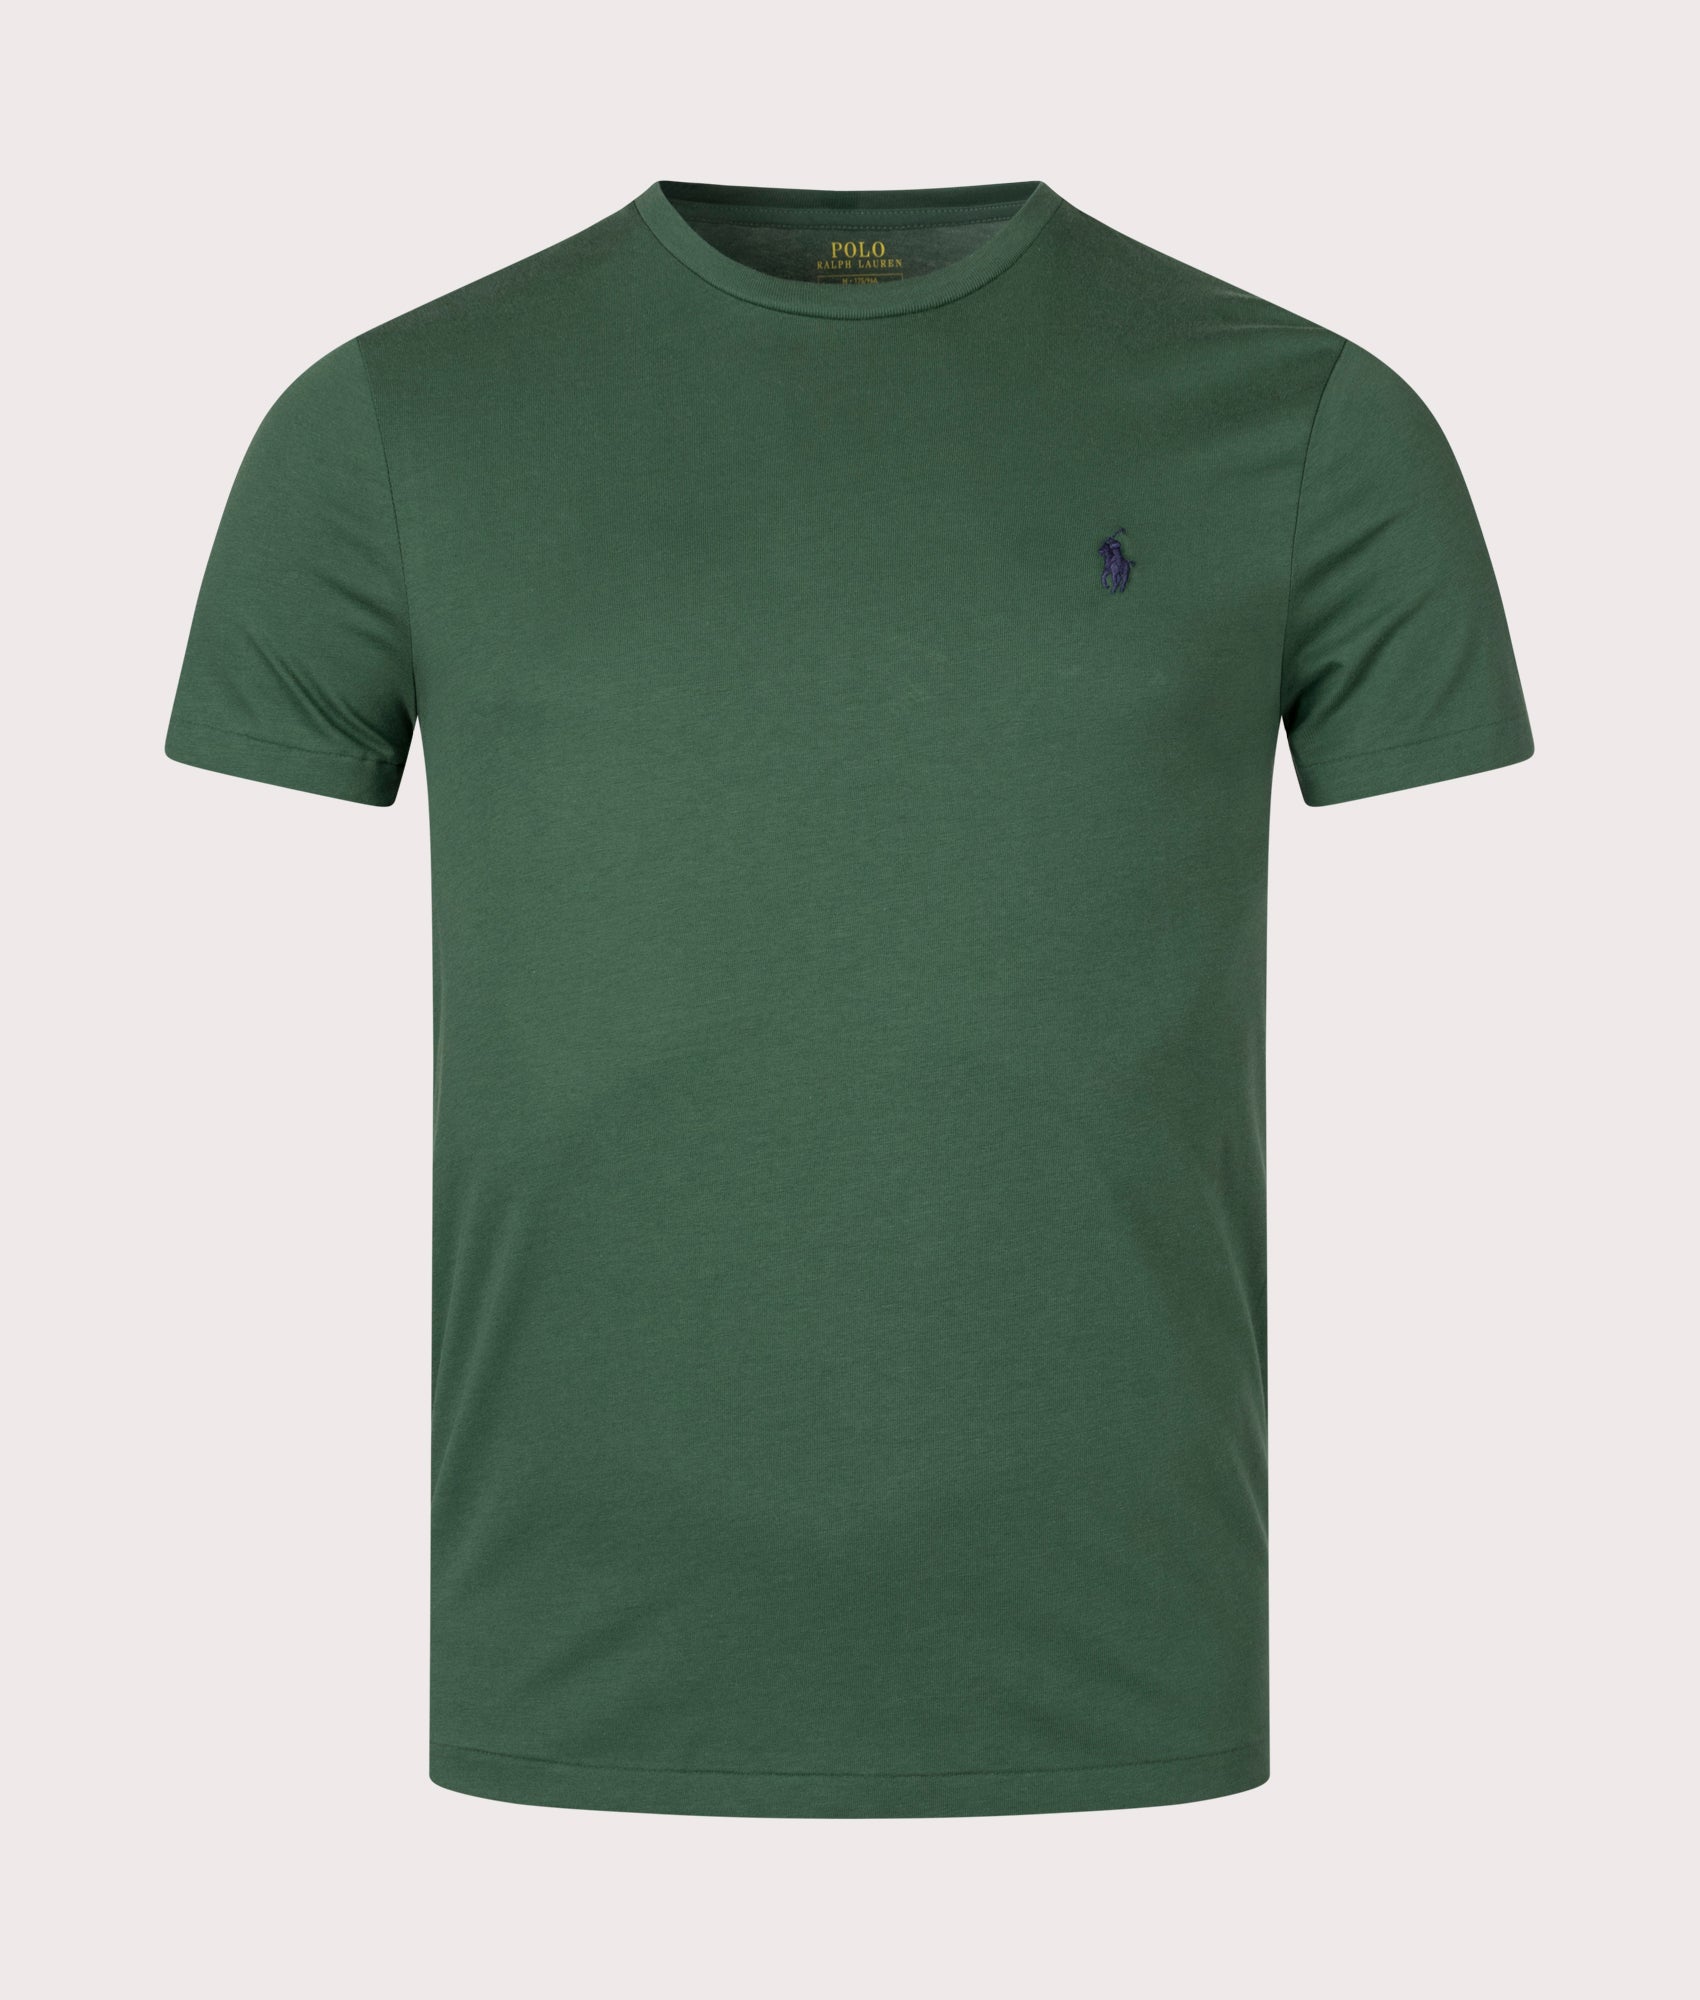 Polo Ralph Lauren Mens Custom Slim Fit T-Shirt - Colour: 323 Washed Forest - Size: XXL